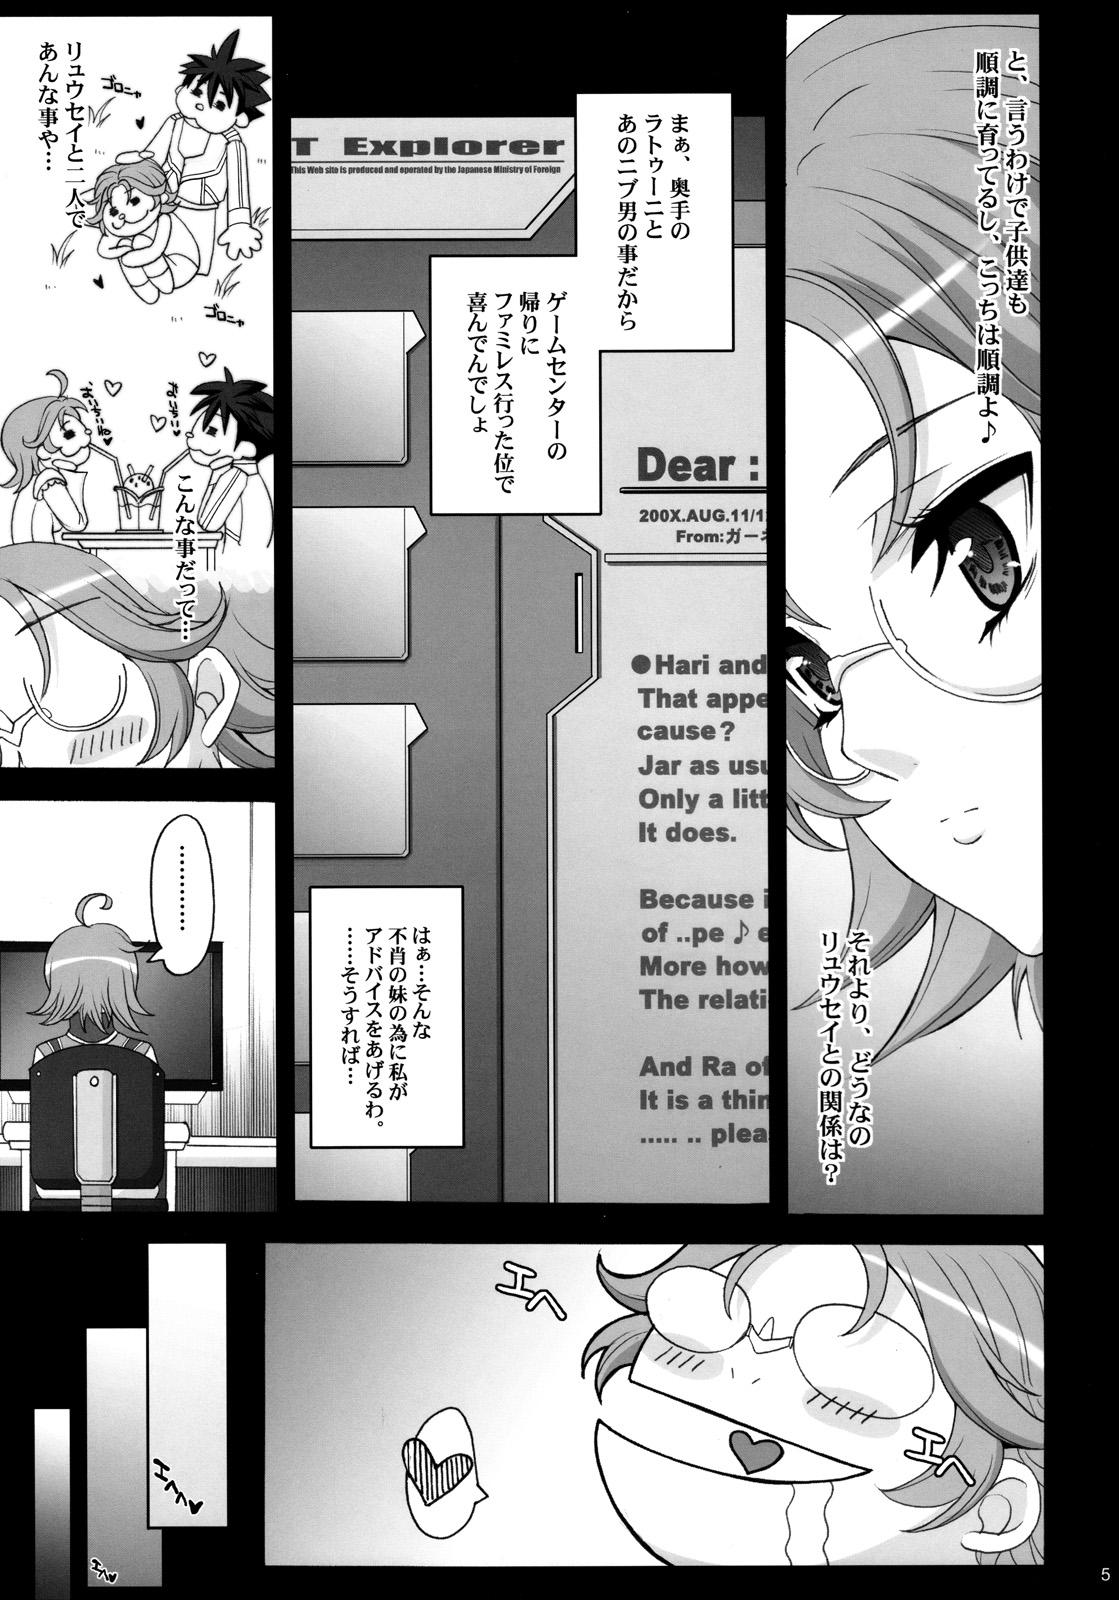 Dildos PRETTY HEROINES 2 - Super robot wars Toy - Page 4